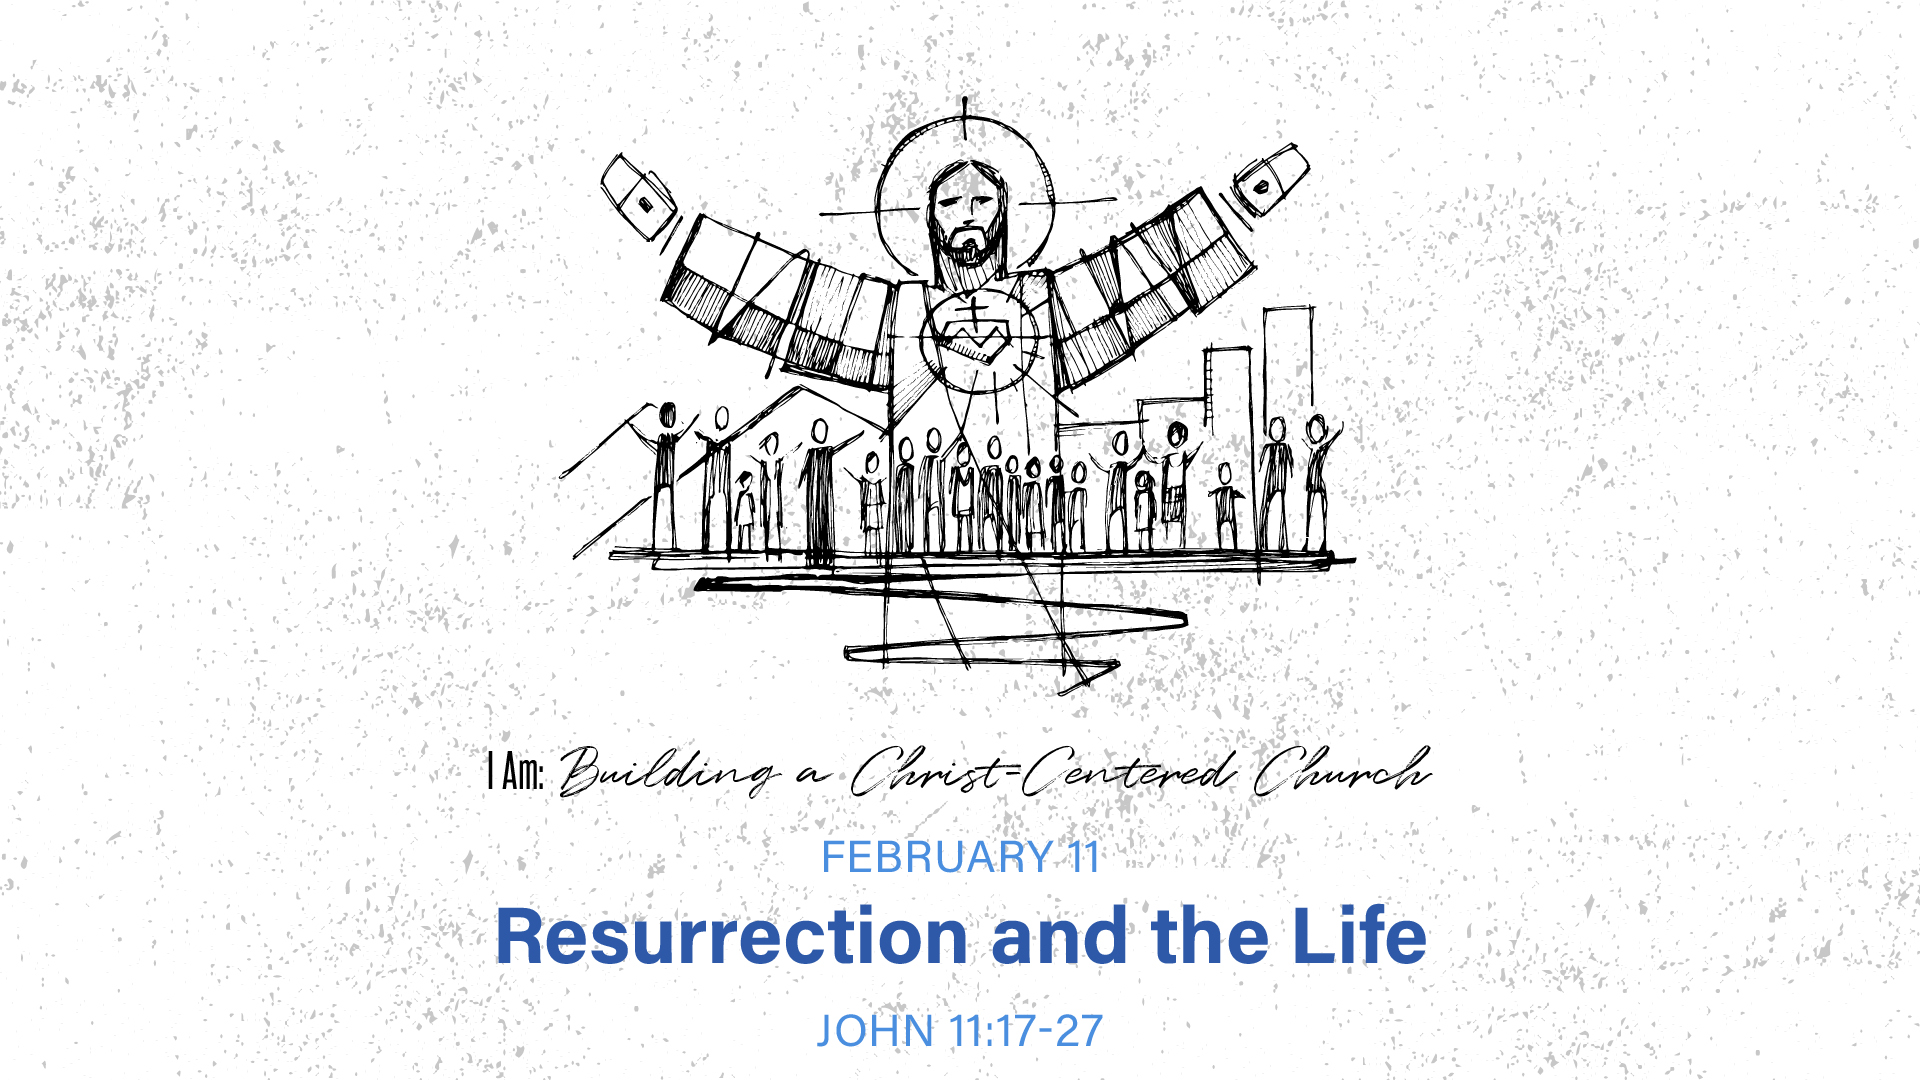 February 11 - Resurrection and the Life